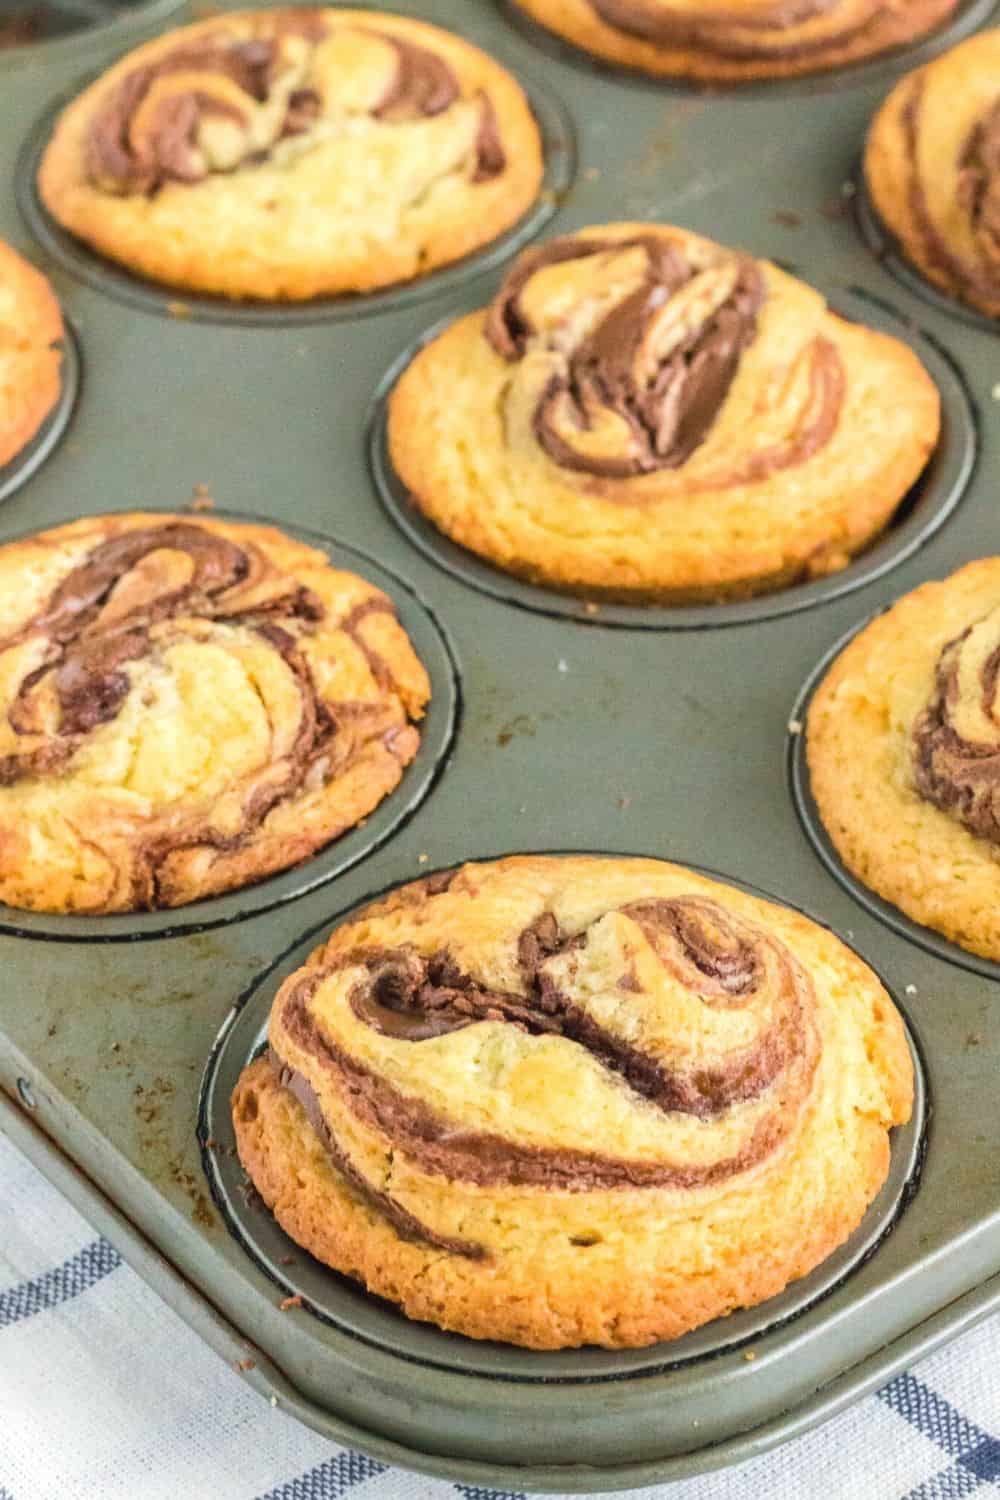 golden brown muffins with chocolate hazelnut spread are in a muffin tin, fresh out of the oven.